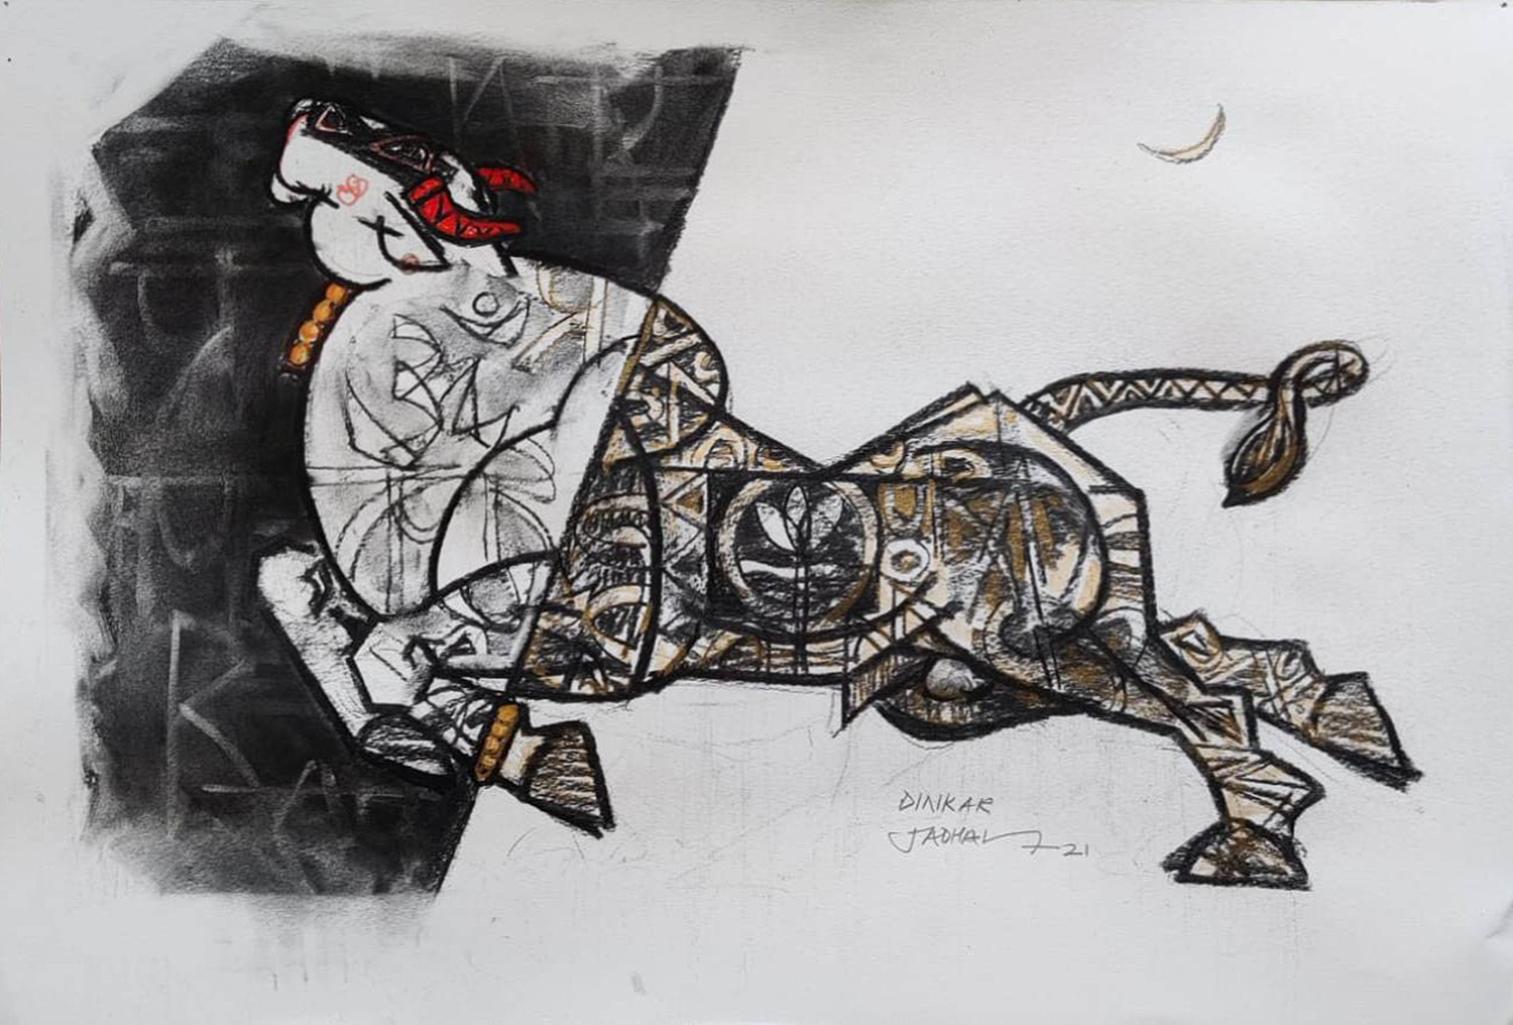 Dinkar Jadhav Abstract Painting - Bull, Charcoal on Canson Paper, Black, Grey Colors Indian Art "In Stock"